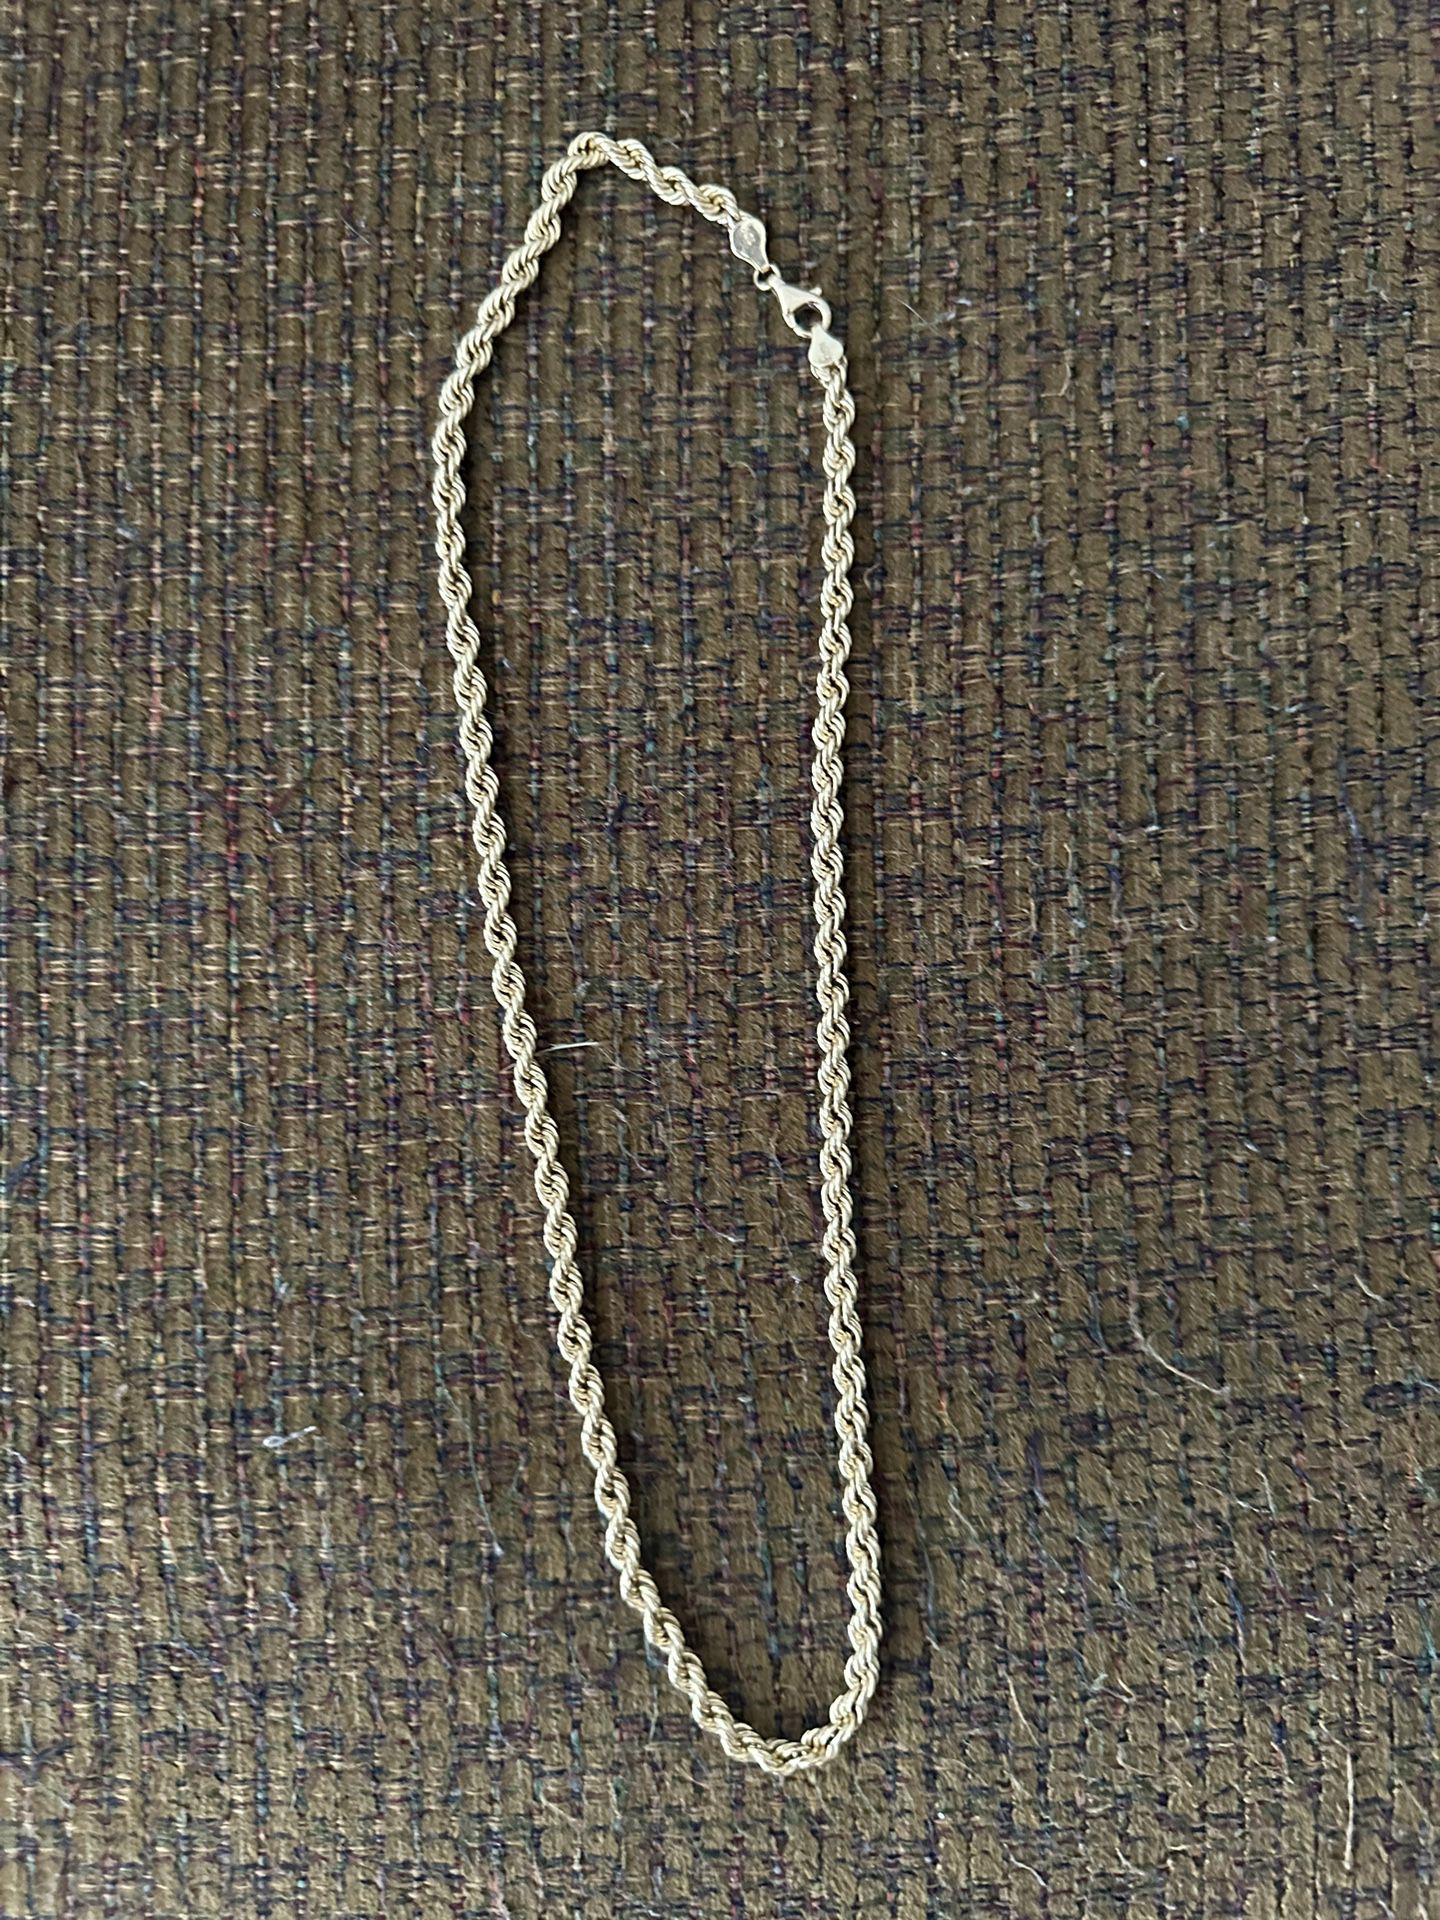 22” Gold Chain (authentic)